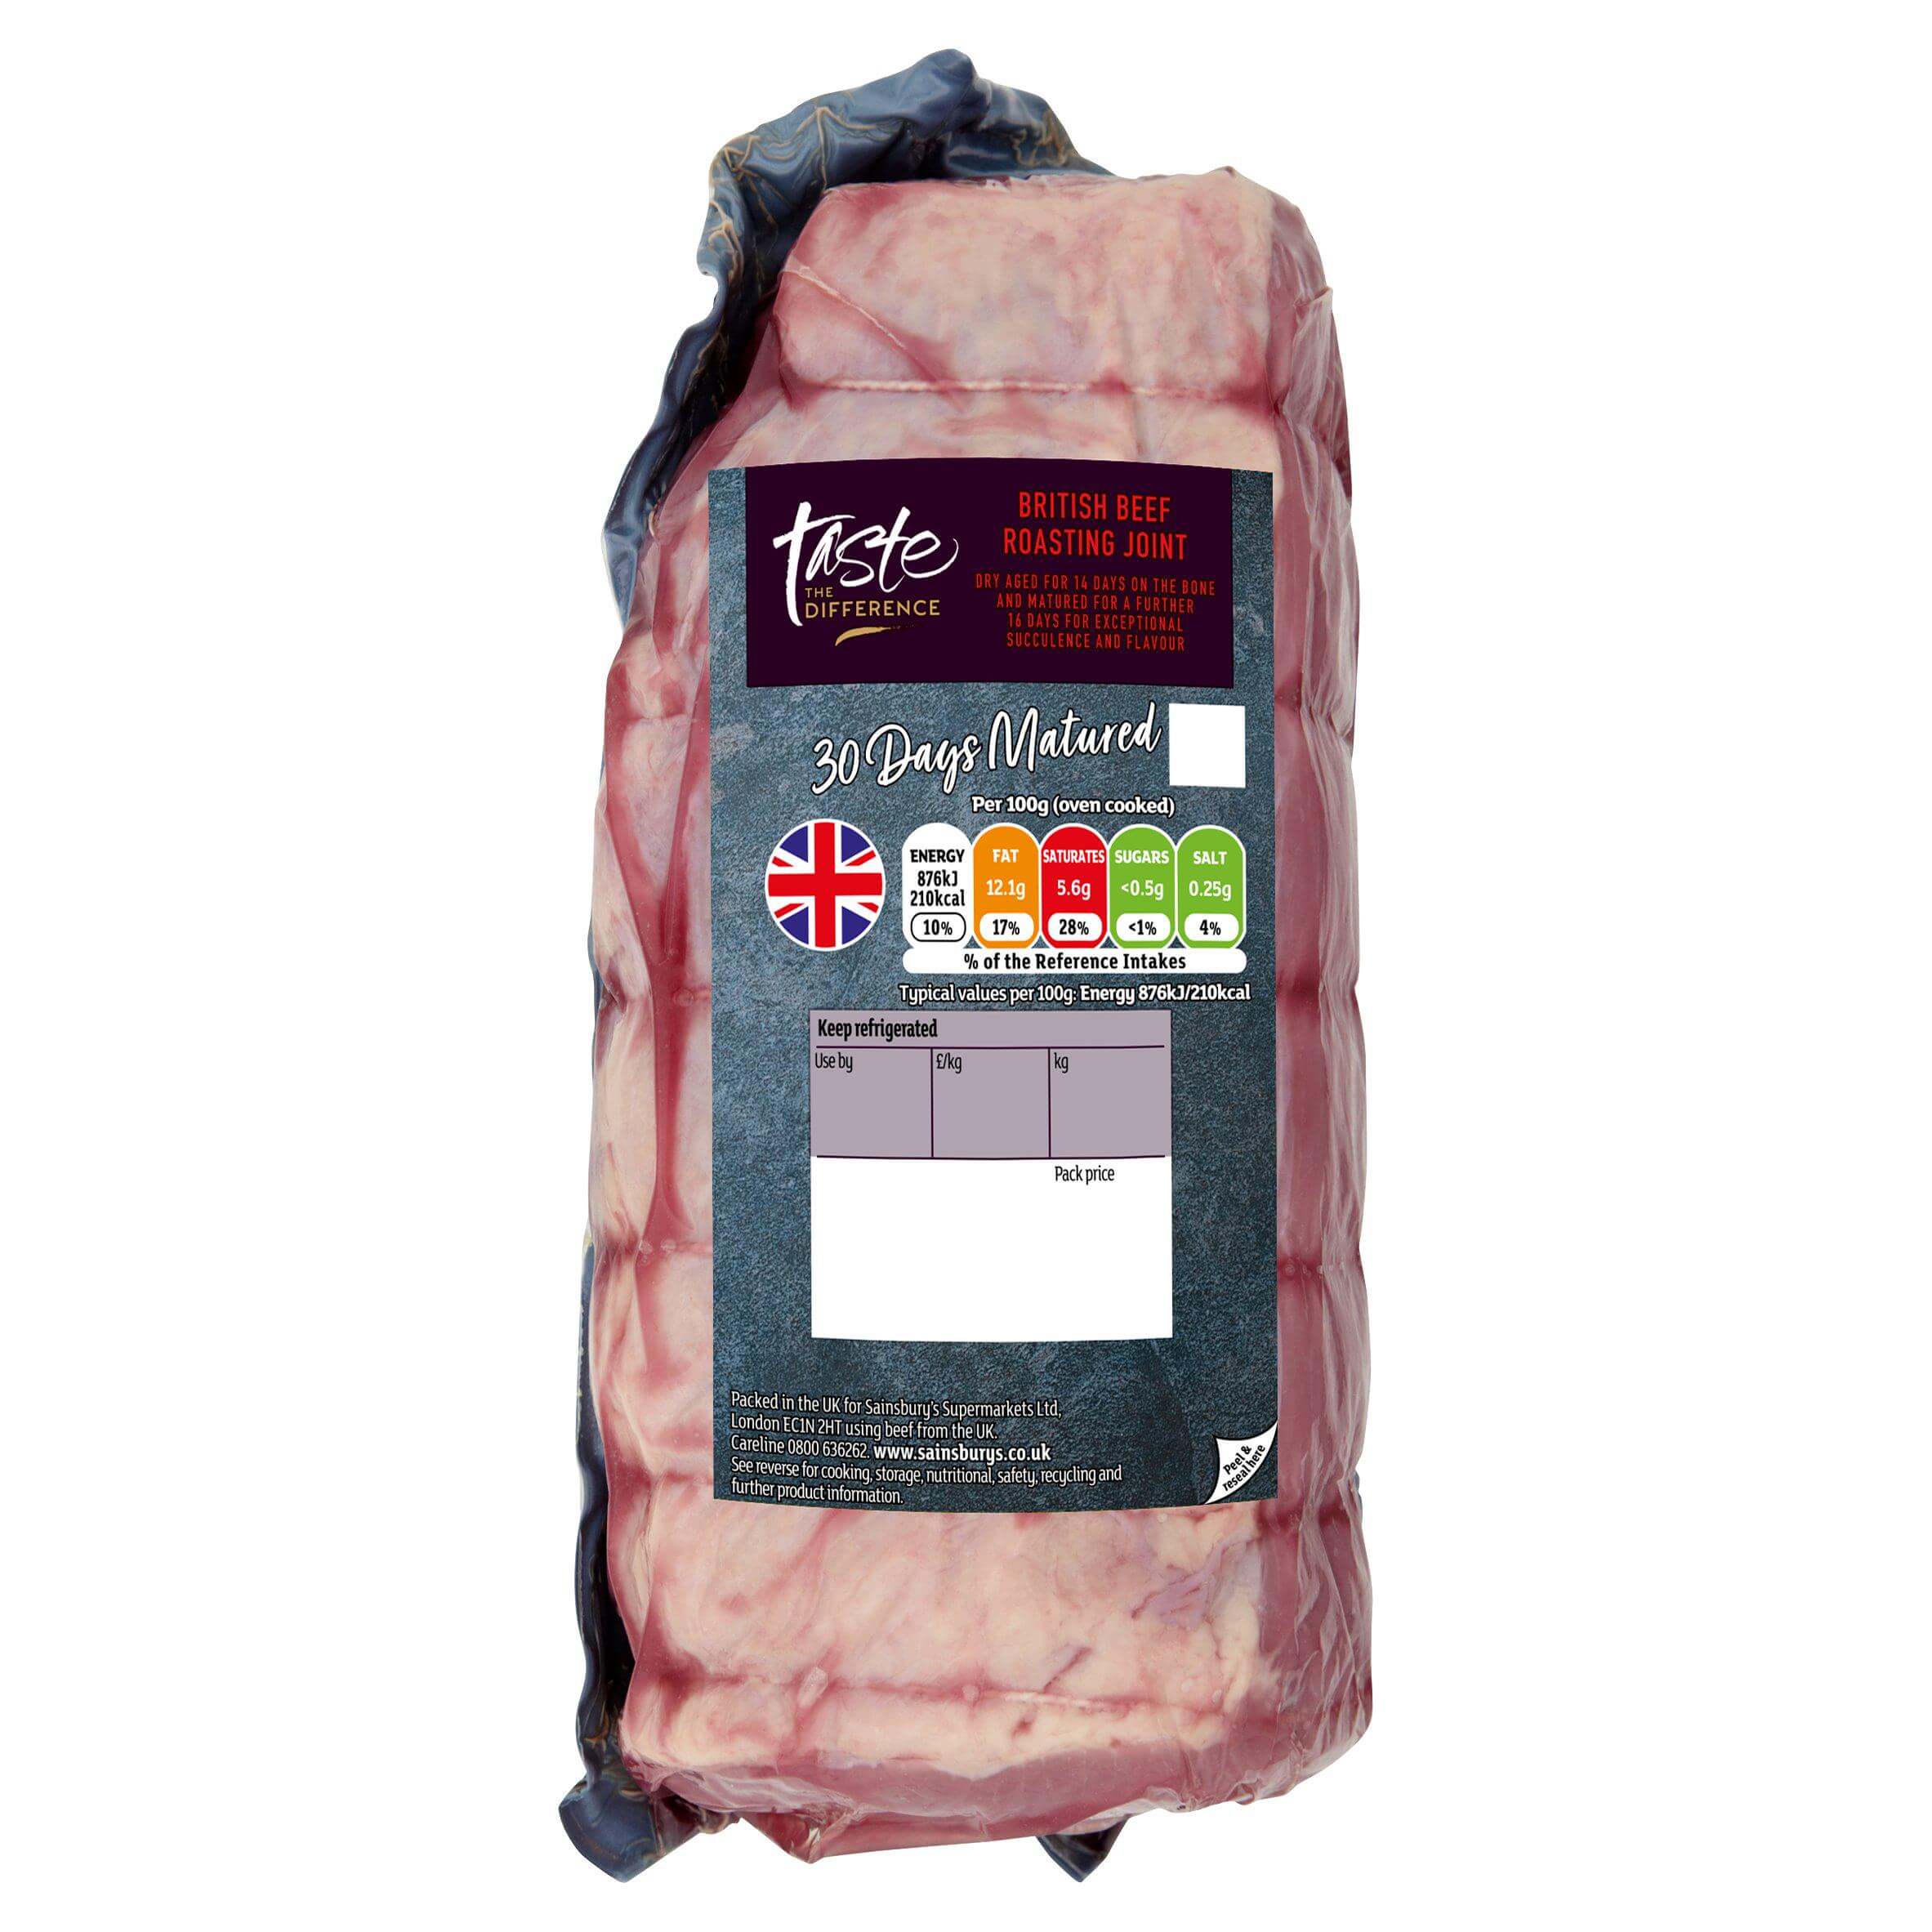 Image of 30 Days Matured British Beef Roasting Joint by Sainsbury's, designed, produced or made in the UK. Buying this product supports a UK business, jobs and the local community.